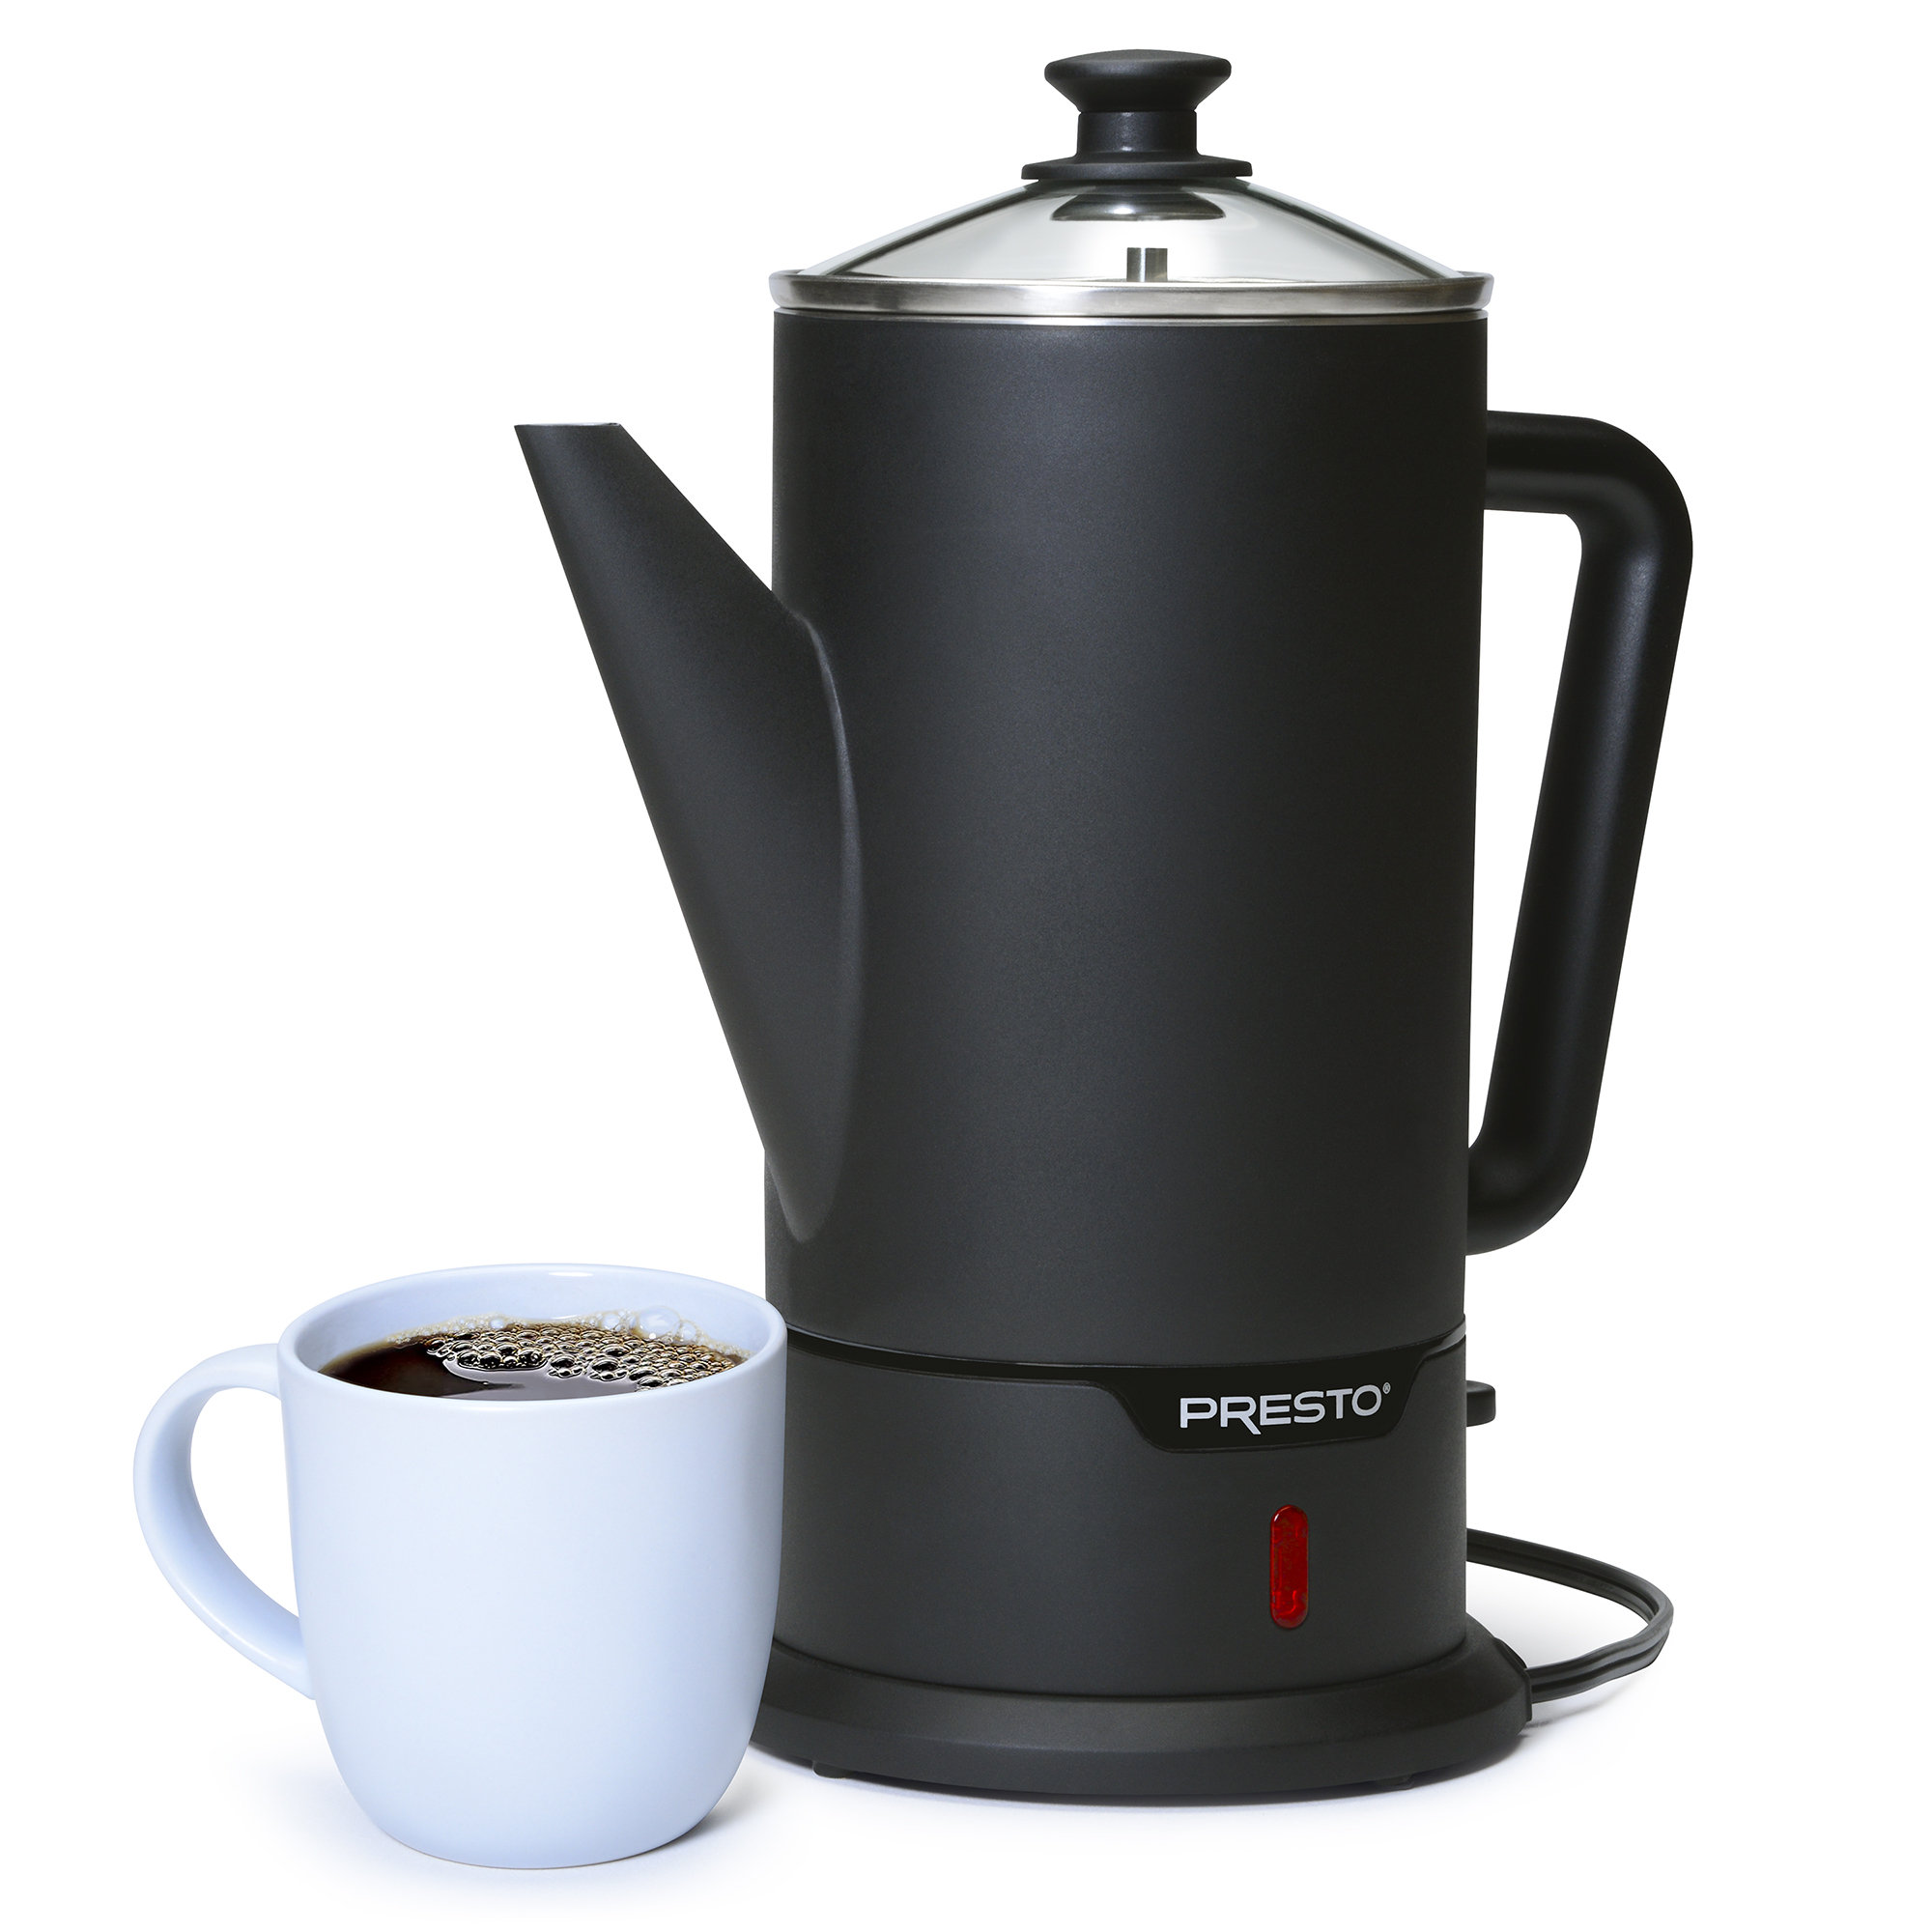 Programmable 5-Cup Percolator & Electric Kettle PARTS & ACCESSORIES